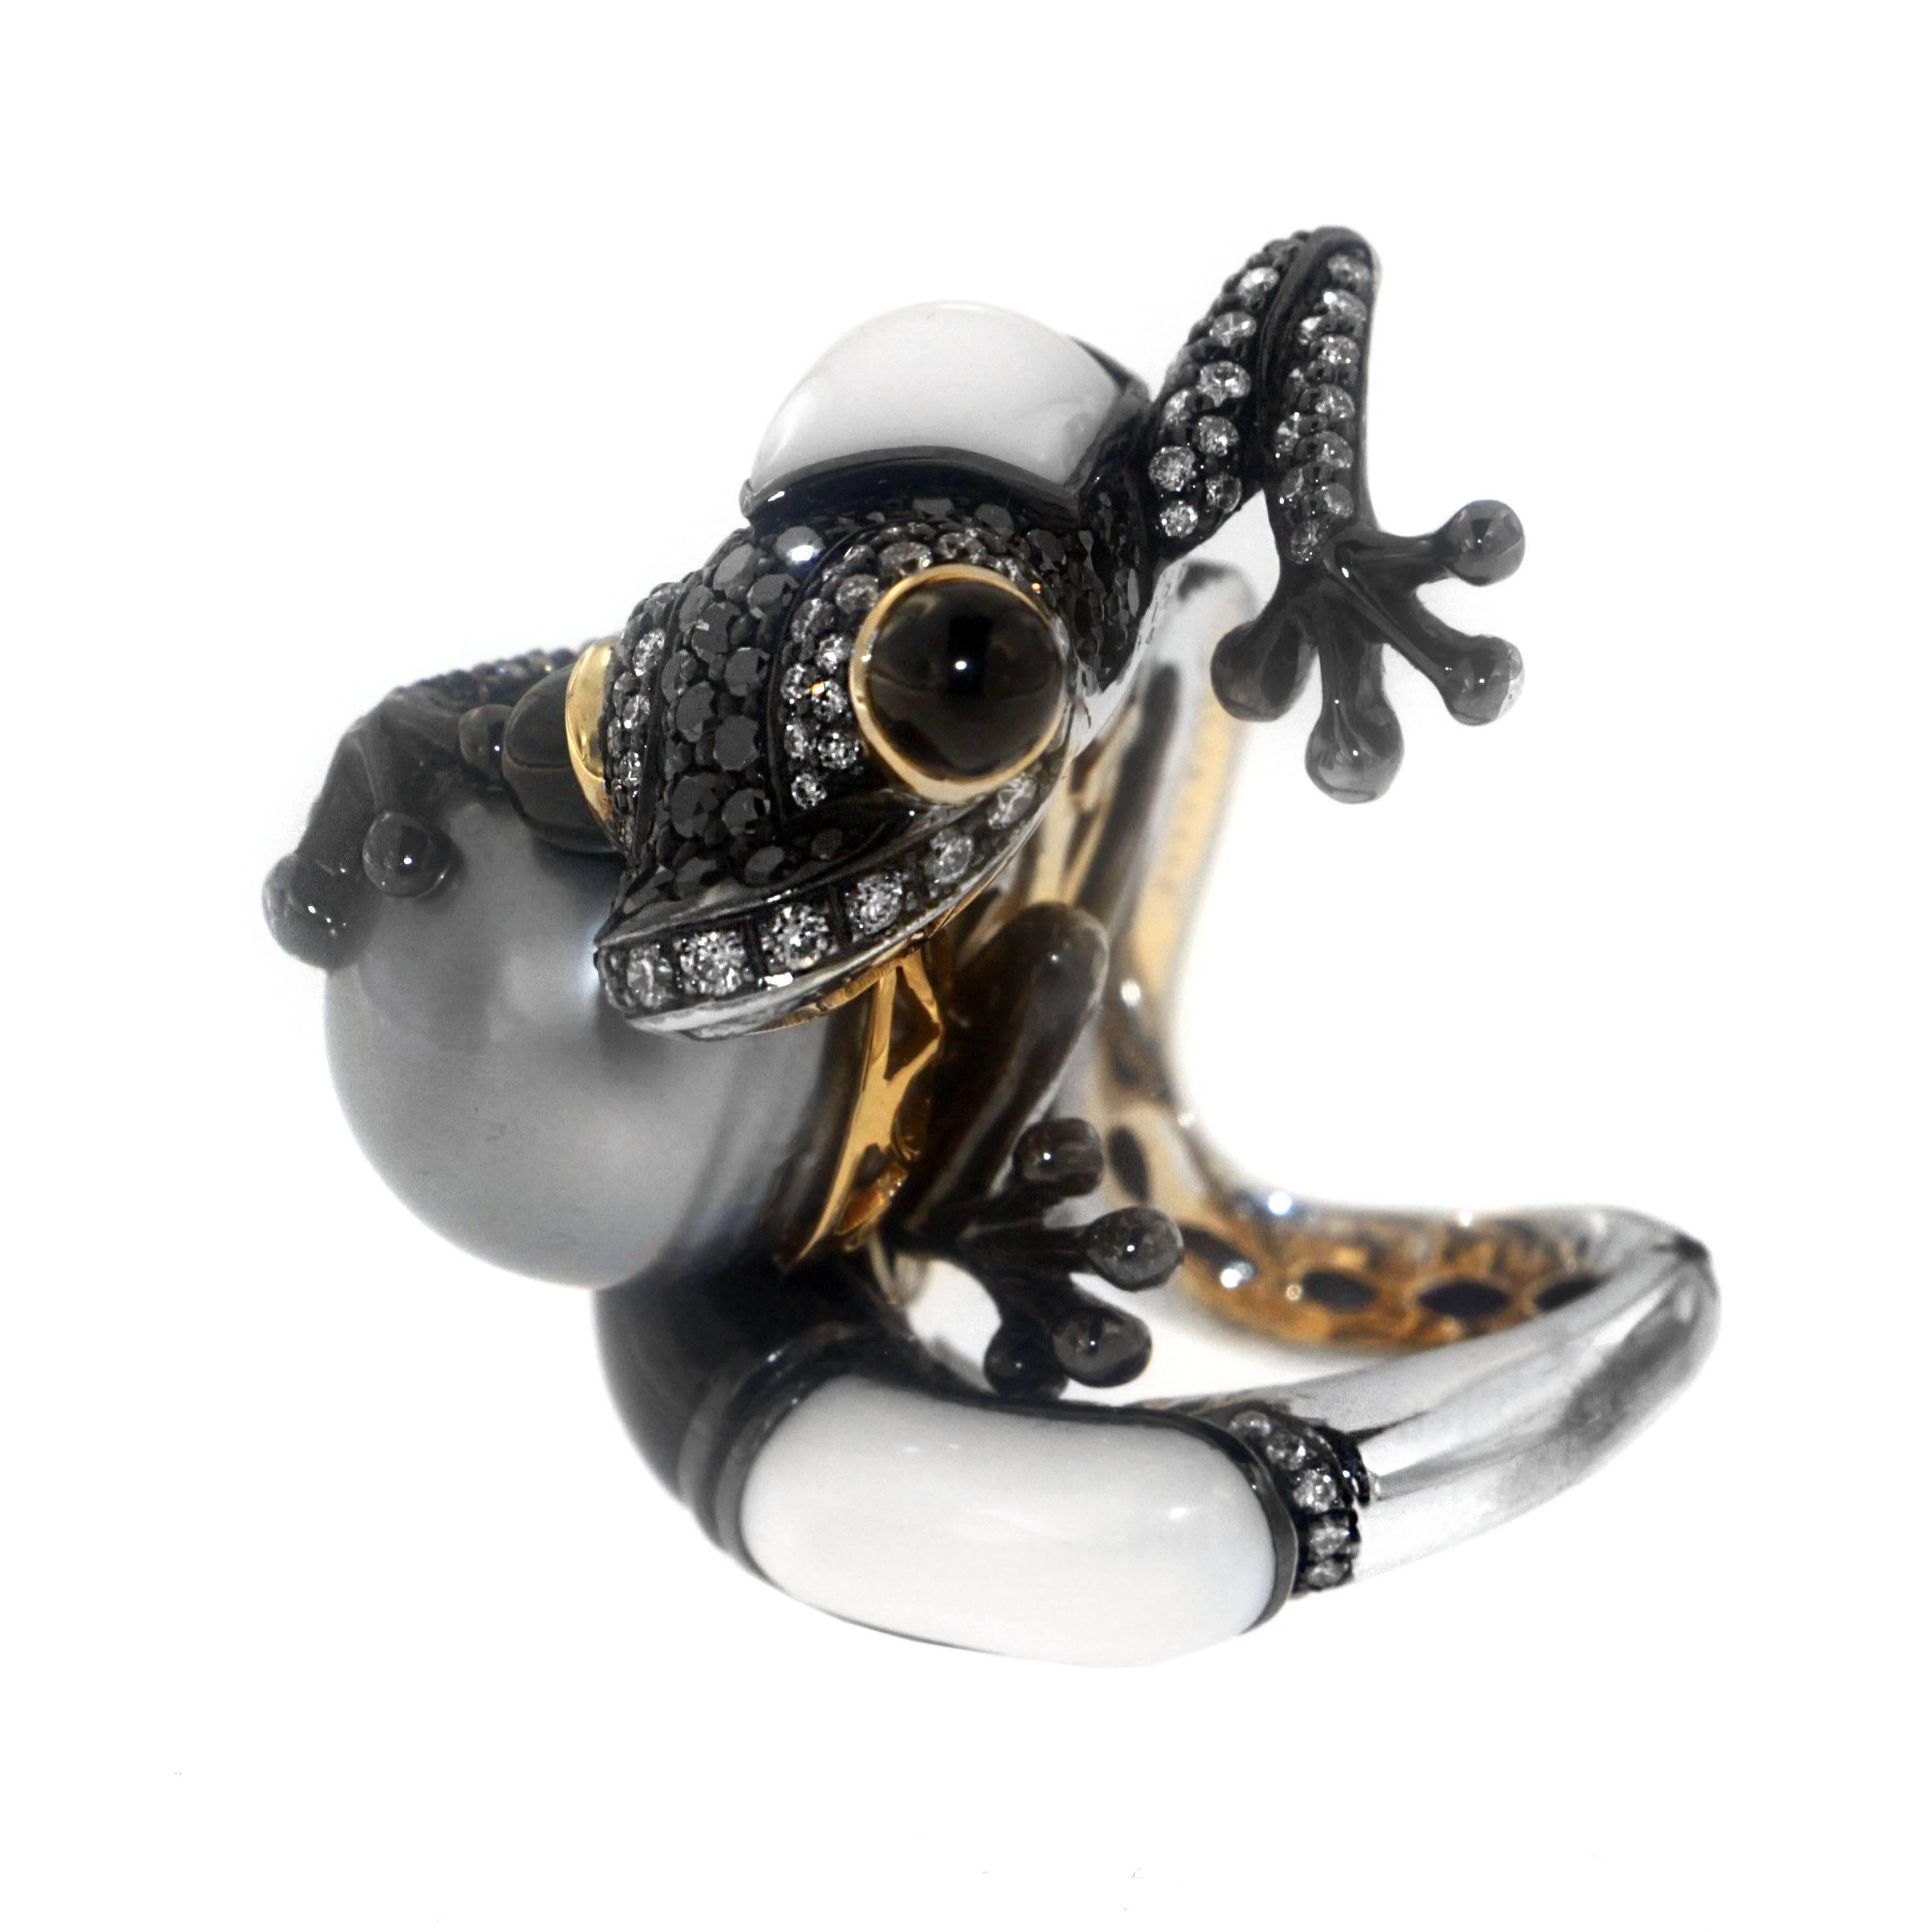 The Gecko carries totem energy conveying its symbolic powers of regeneration, renewal, and rebirth. Zorab celebrates this marvelous creature with its version of a Black and White Gecko resting on a Black Pearl.  This conversation piece ring is